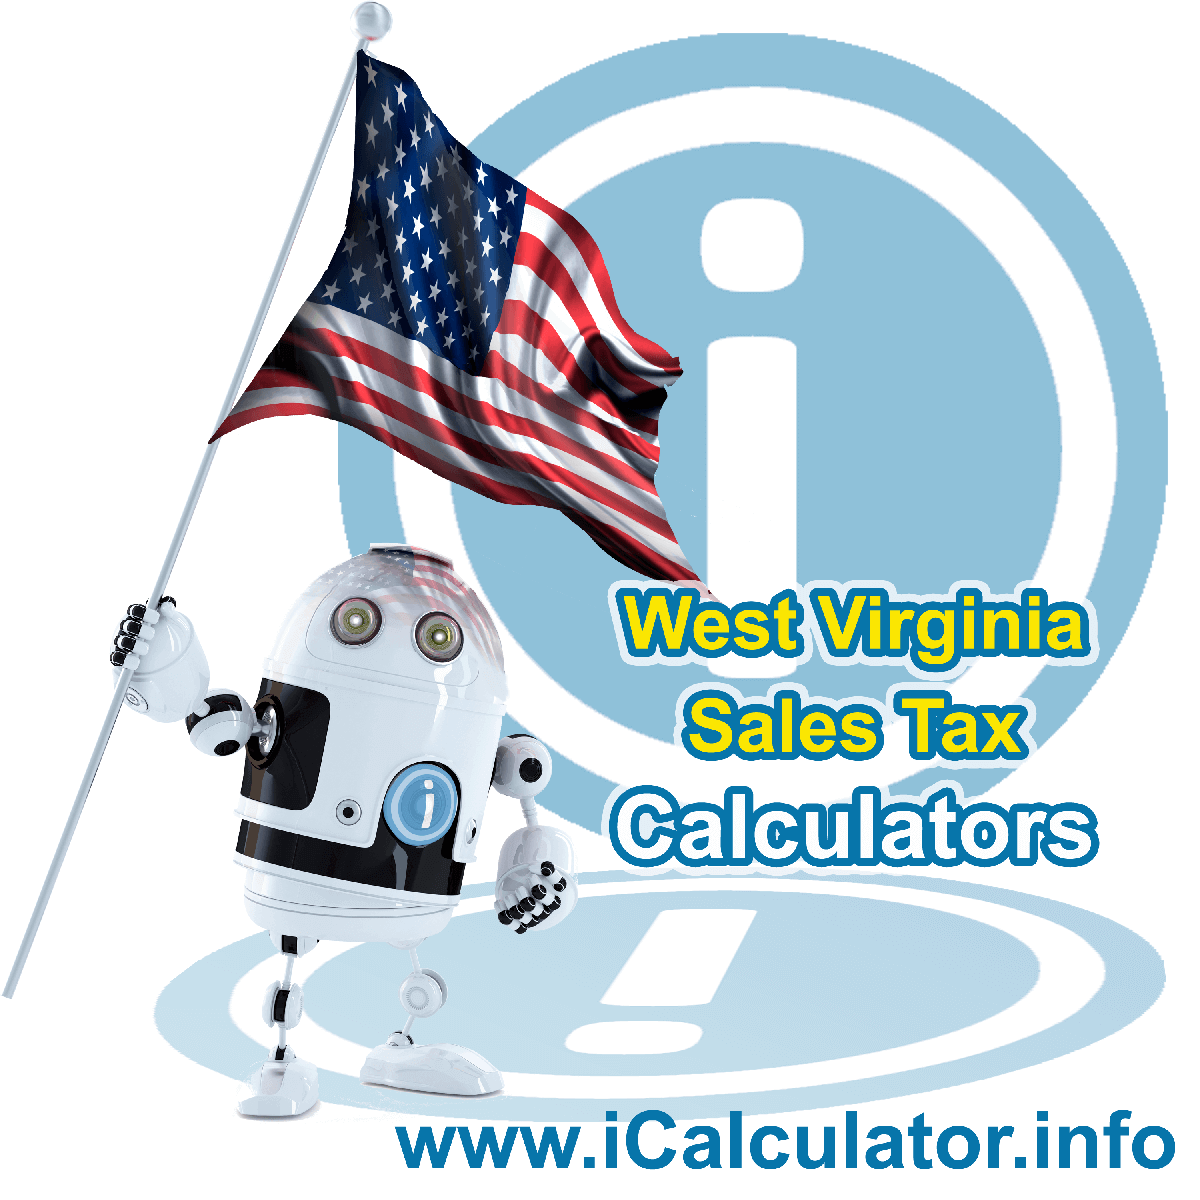 Harpers Ferry, West Virginia Sales Tax Comparison Calculator: This image illustrates a calculator robot comparing sales tax in Harpers Ferry, West Virginia manually using the Harpers Ferry, West Virginia Sales Tax Formula. You can use this information to compare Sales Tax manually or use the Harpers Ferry, West Virginia Sales Tax Comparison Calculator to calculate and compare Harpers Ferry, West Virginia sales tax online.